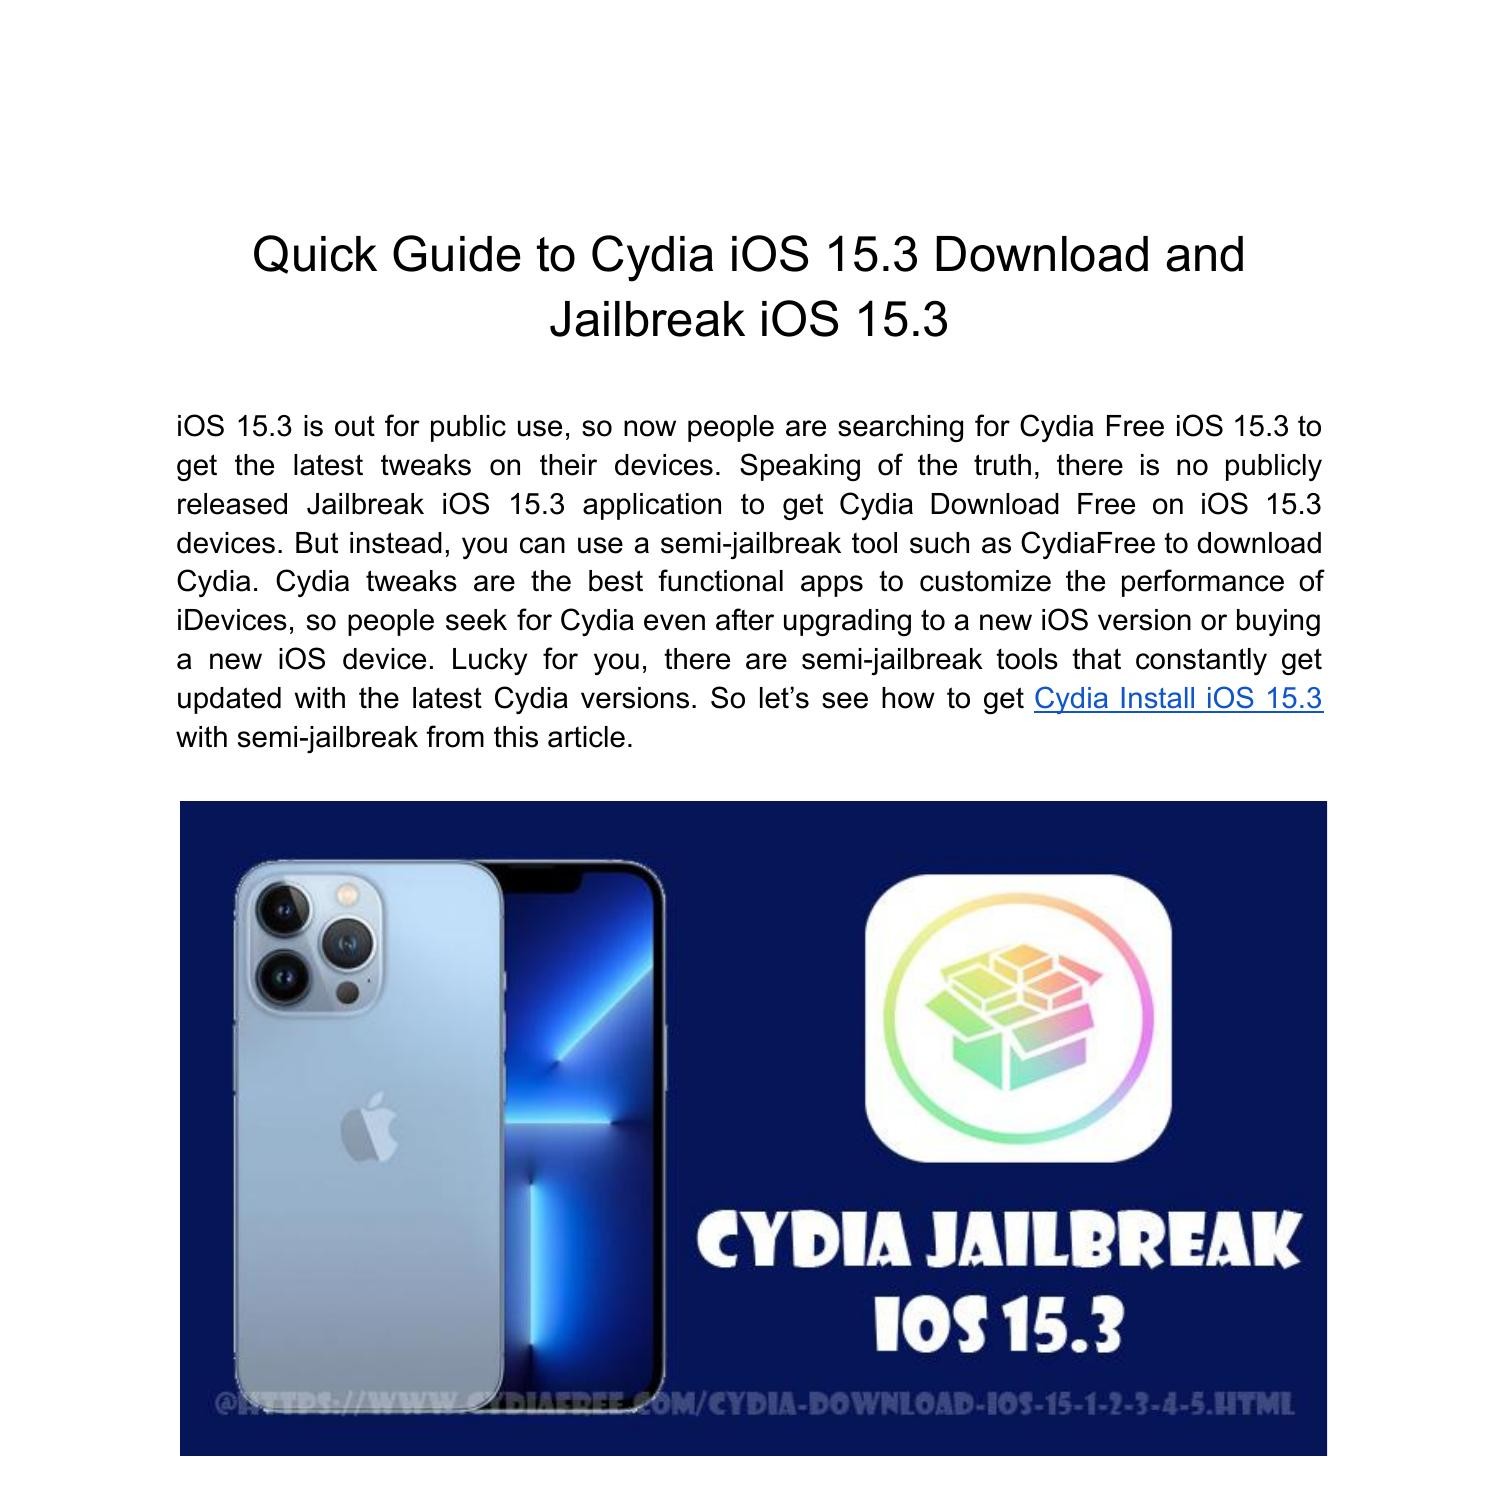 Quick Guide To Cydia Ios 15 3 Download And Jailbreak Ios 15 3 Pdf Docdroid